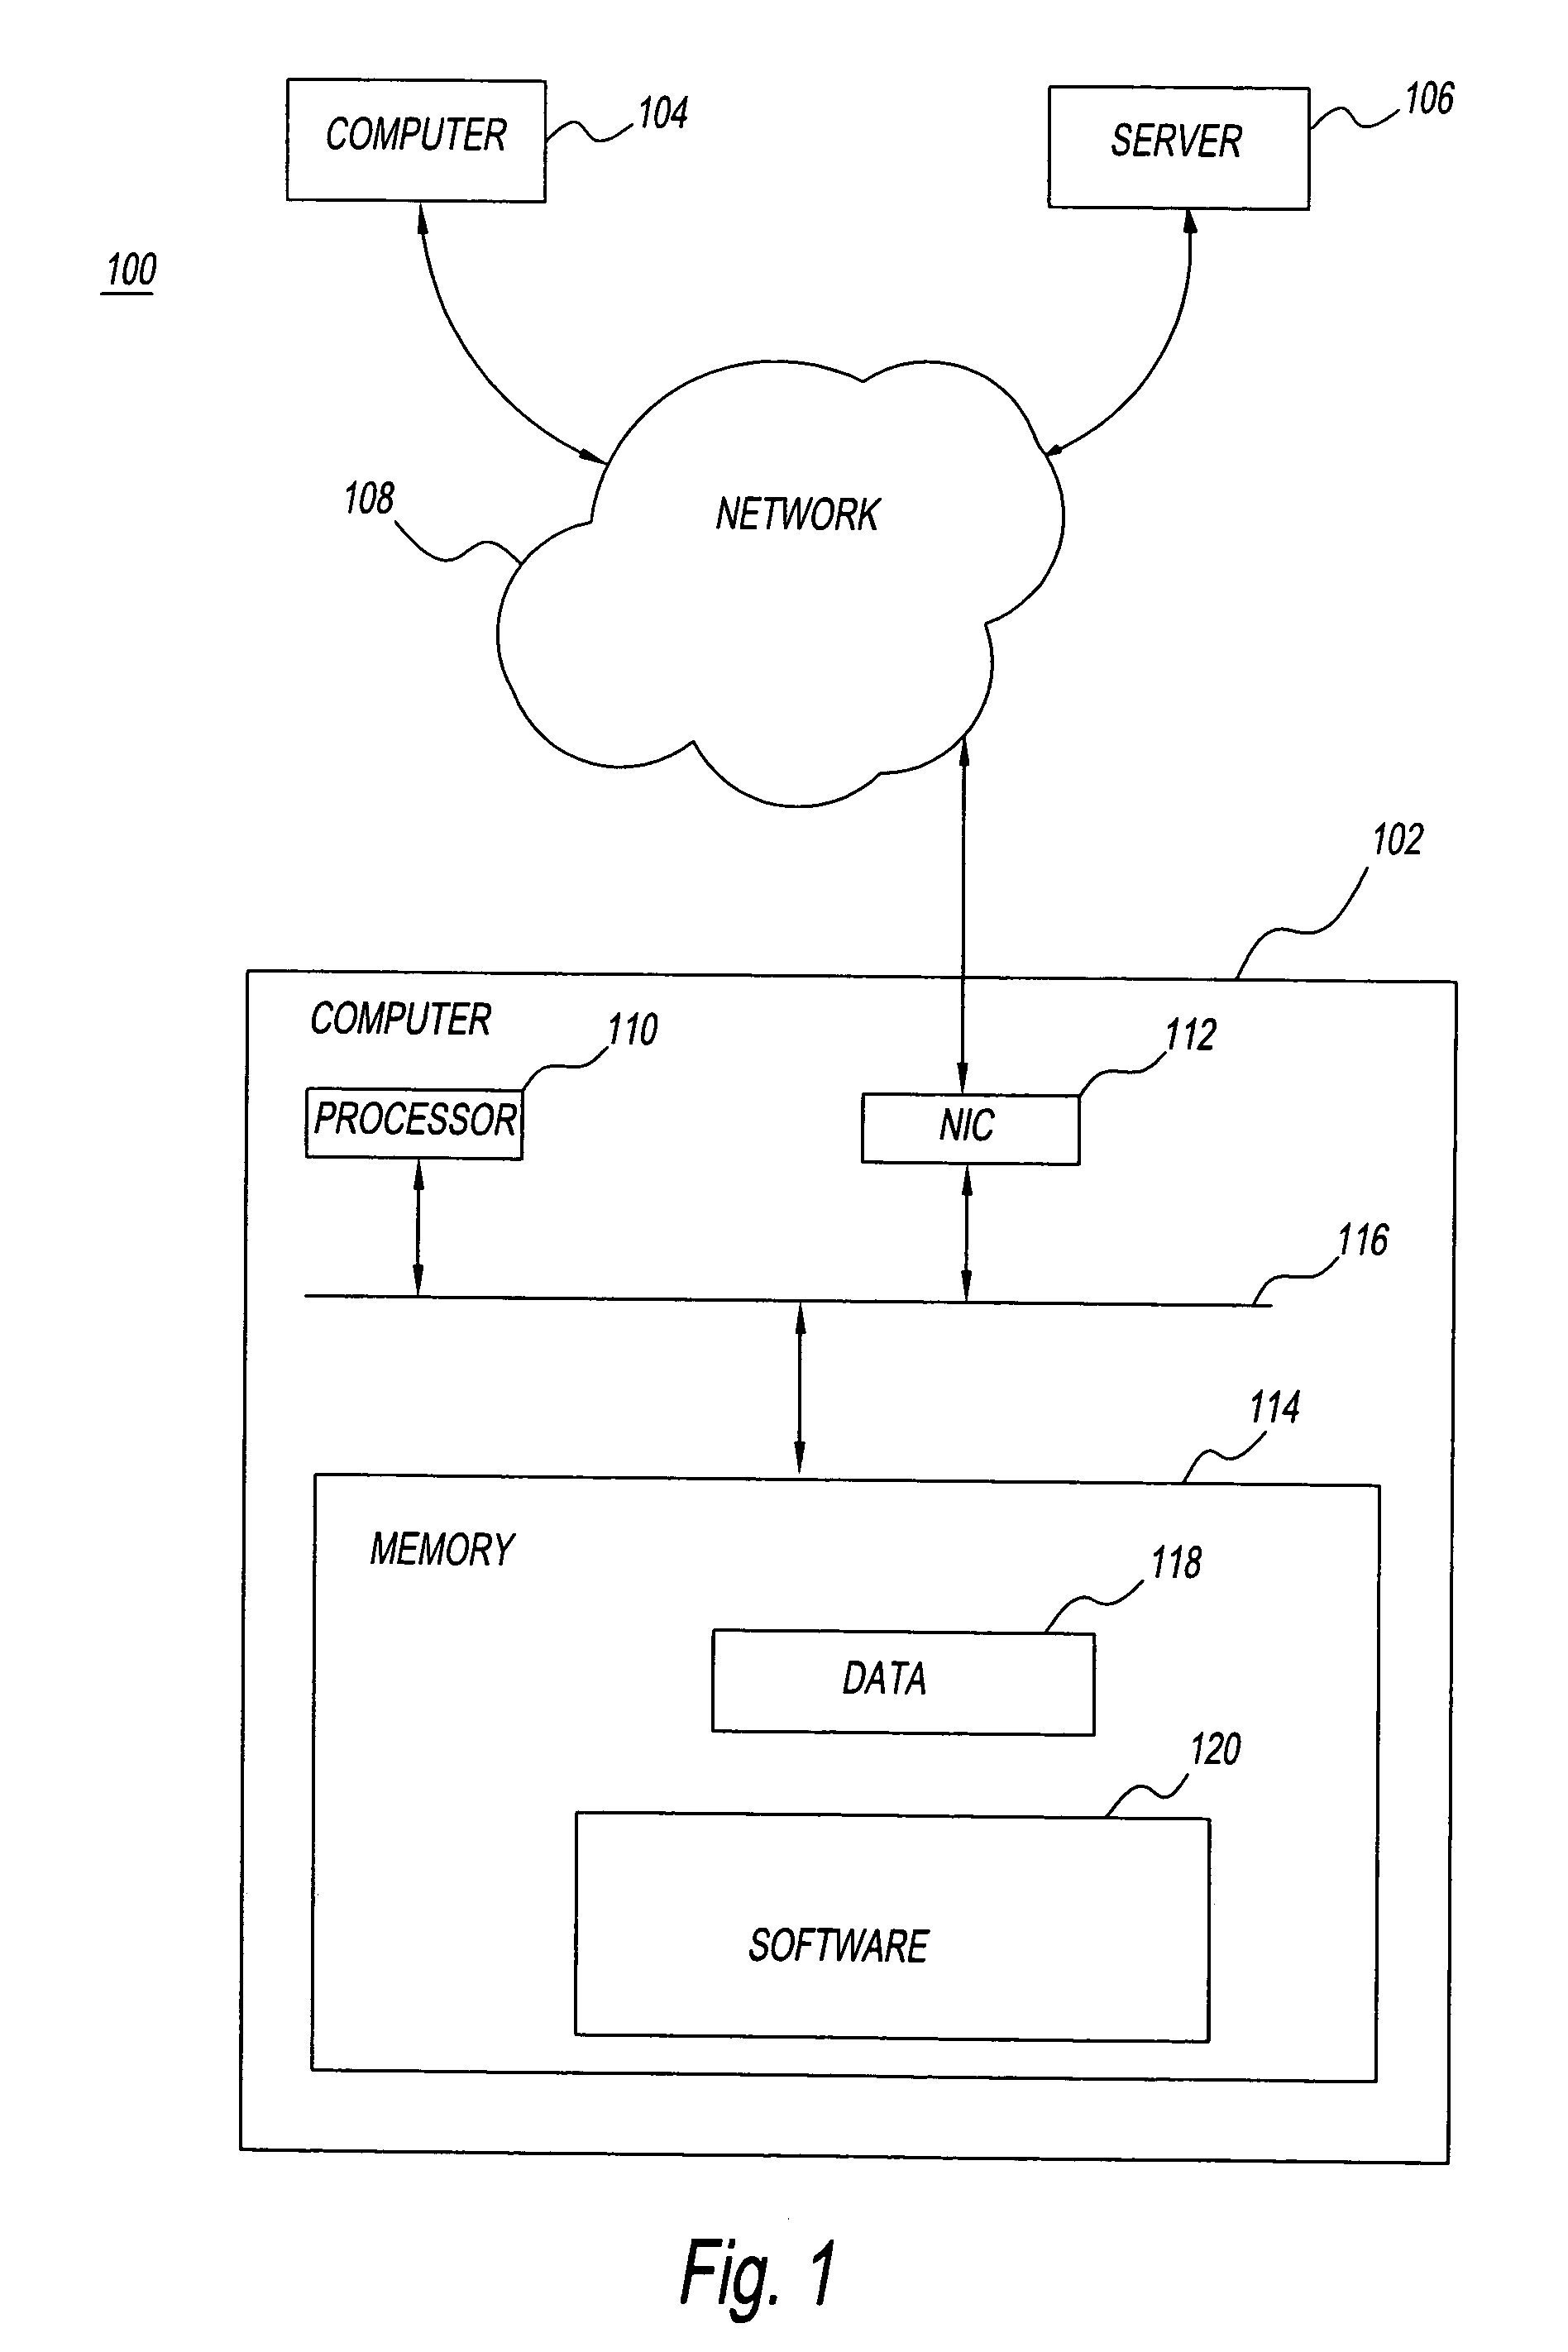 Computer and method for on-demand network access control